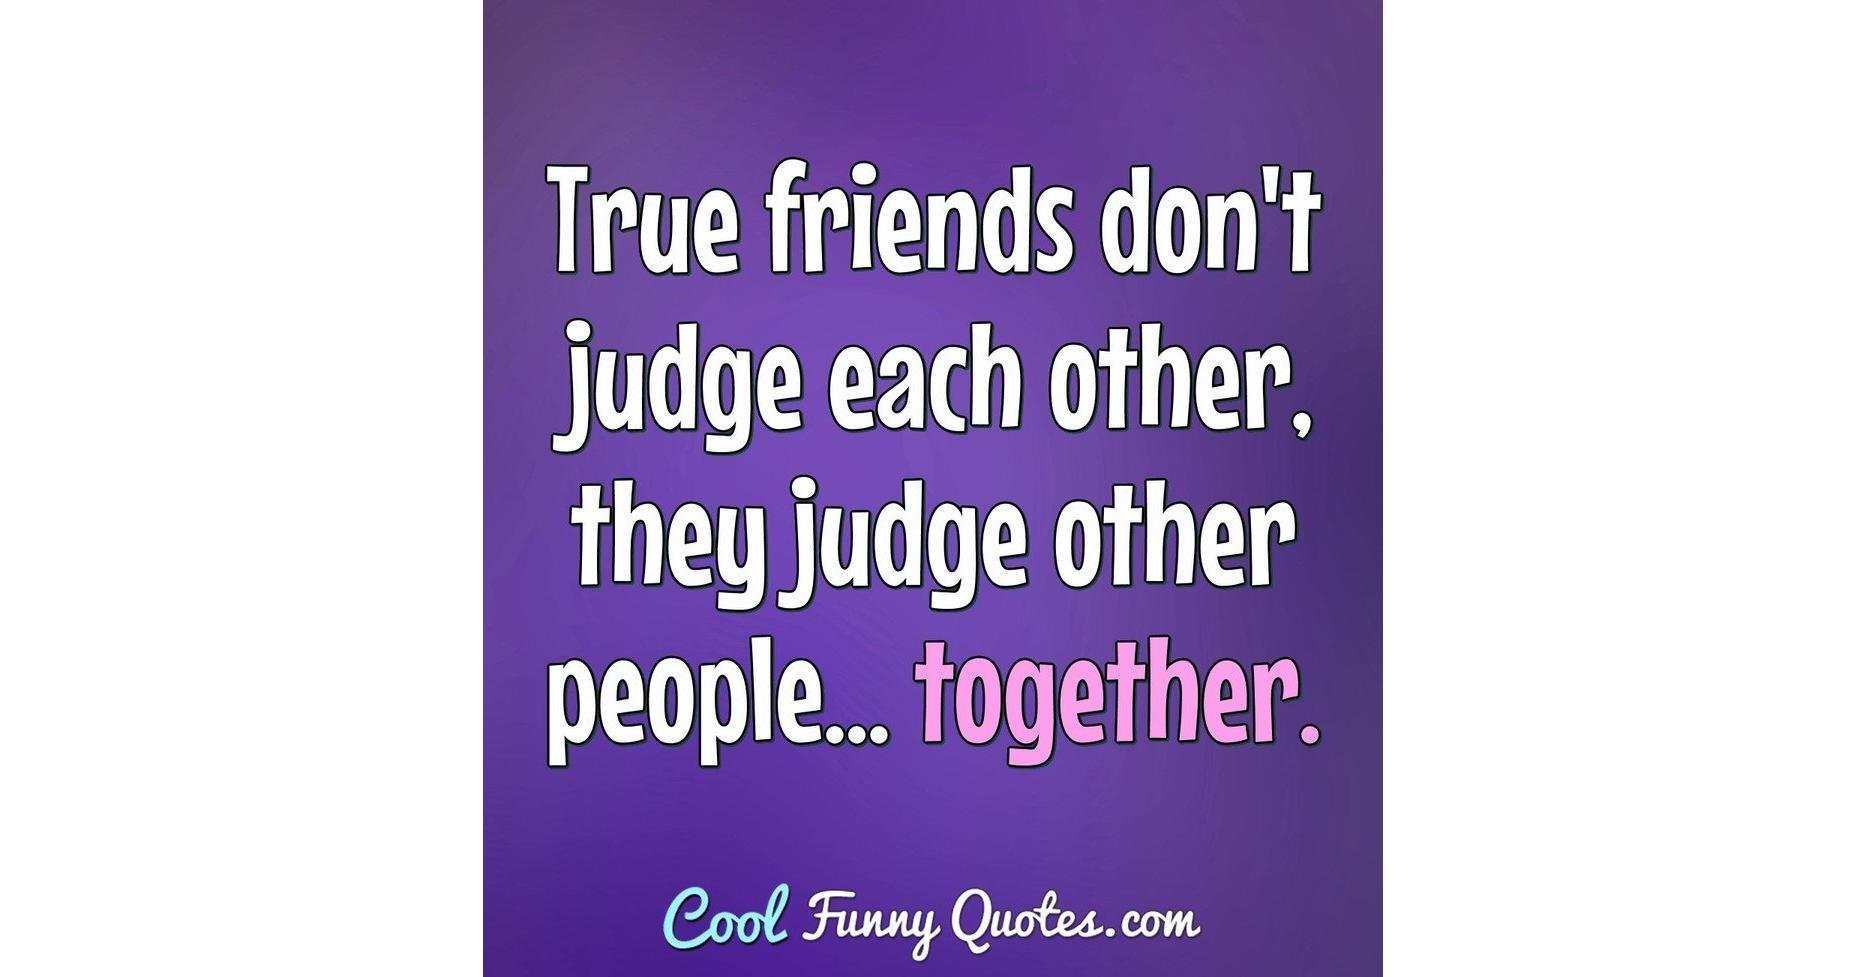 True friends don't judge each other, they judge other people ...